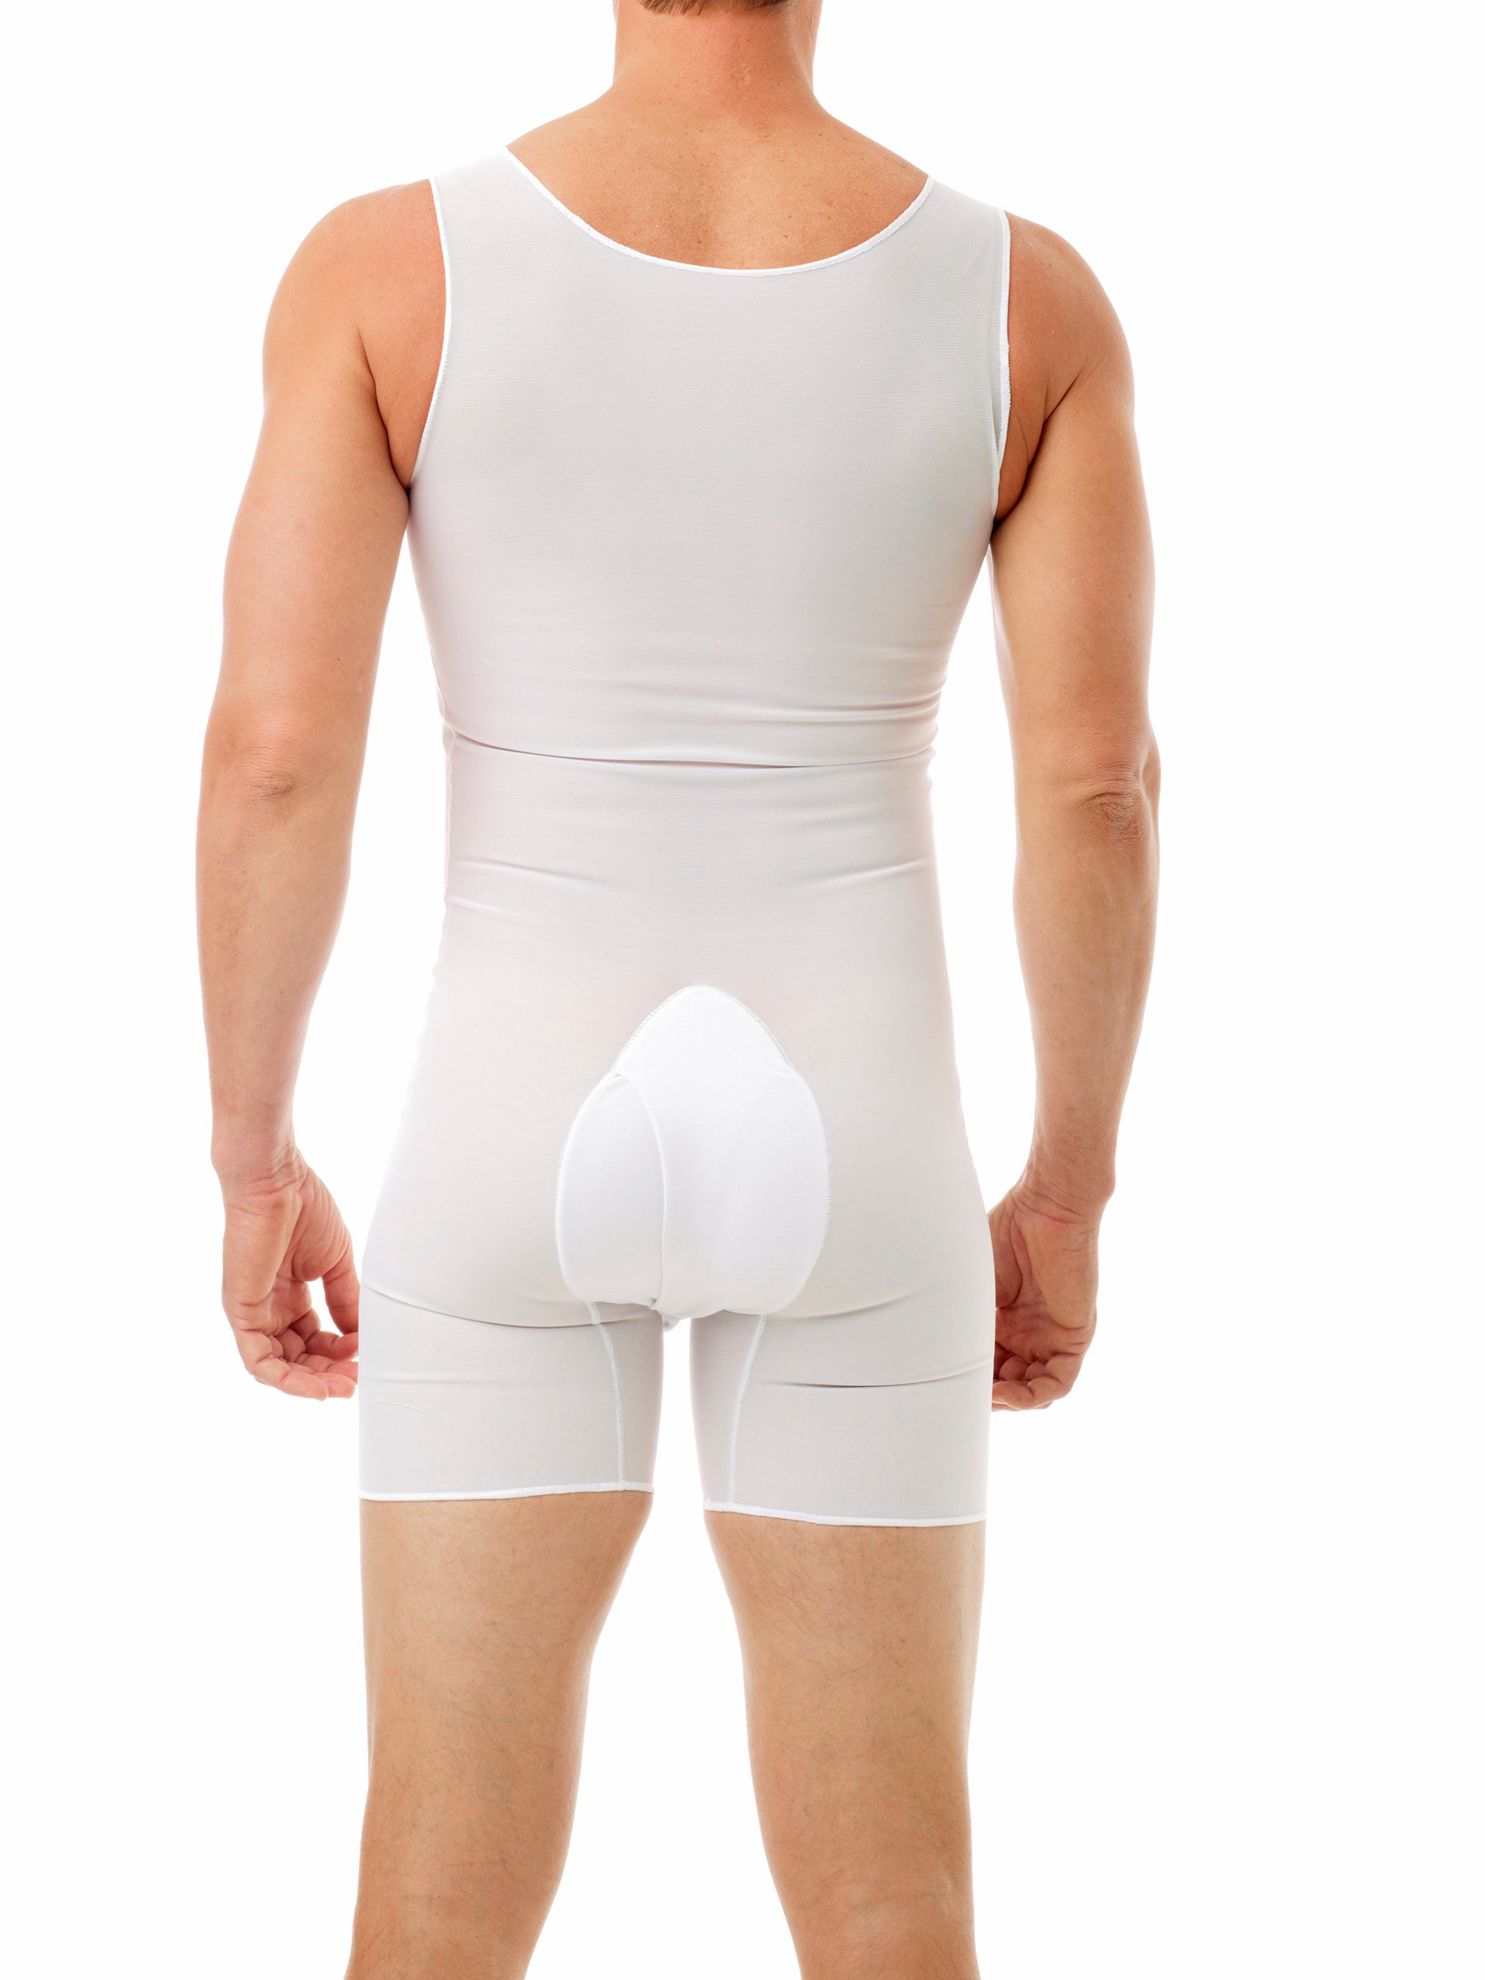 Snip-A-Length Pettipants 3-Pack. Men Compression Shirts, Girdles, Chest  Binders, Hernia Garments